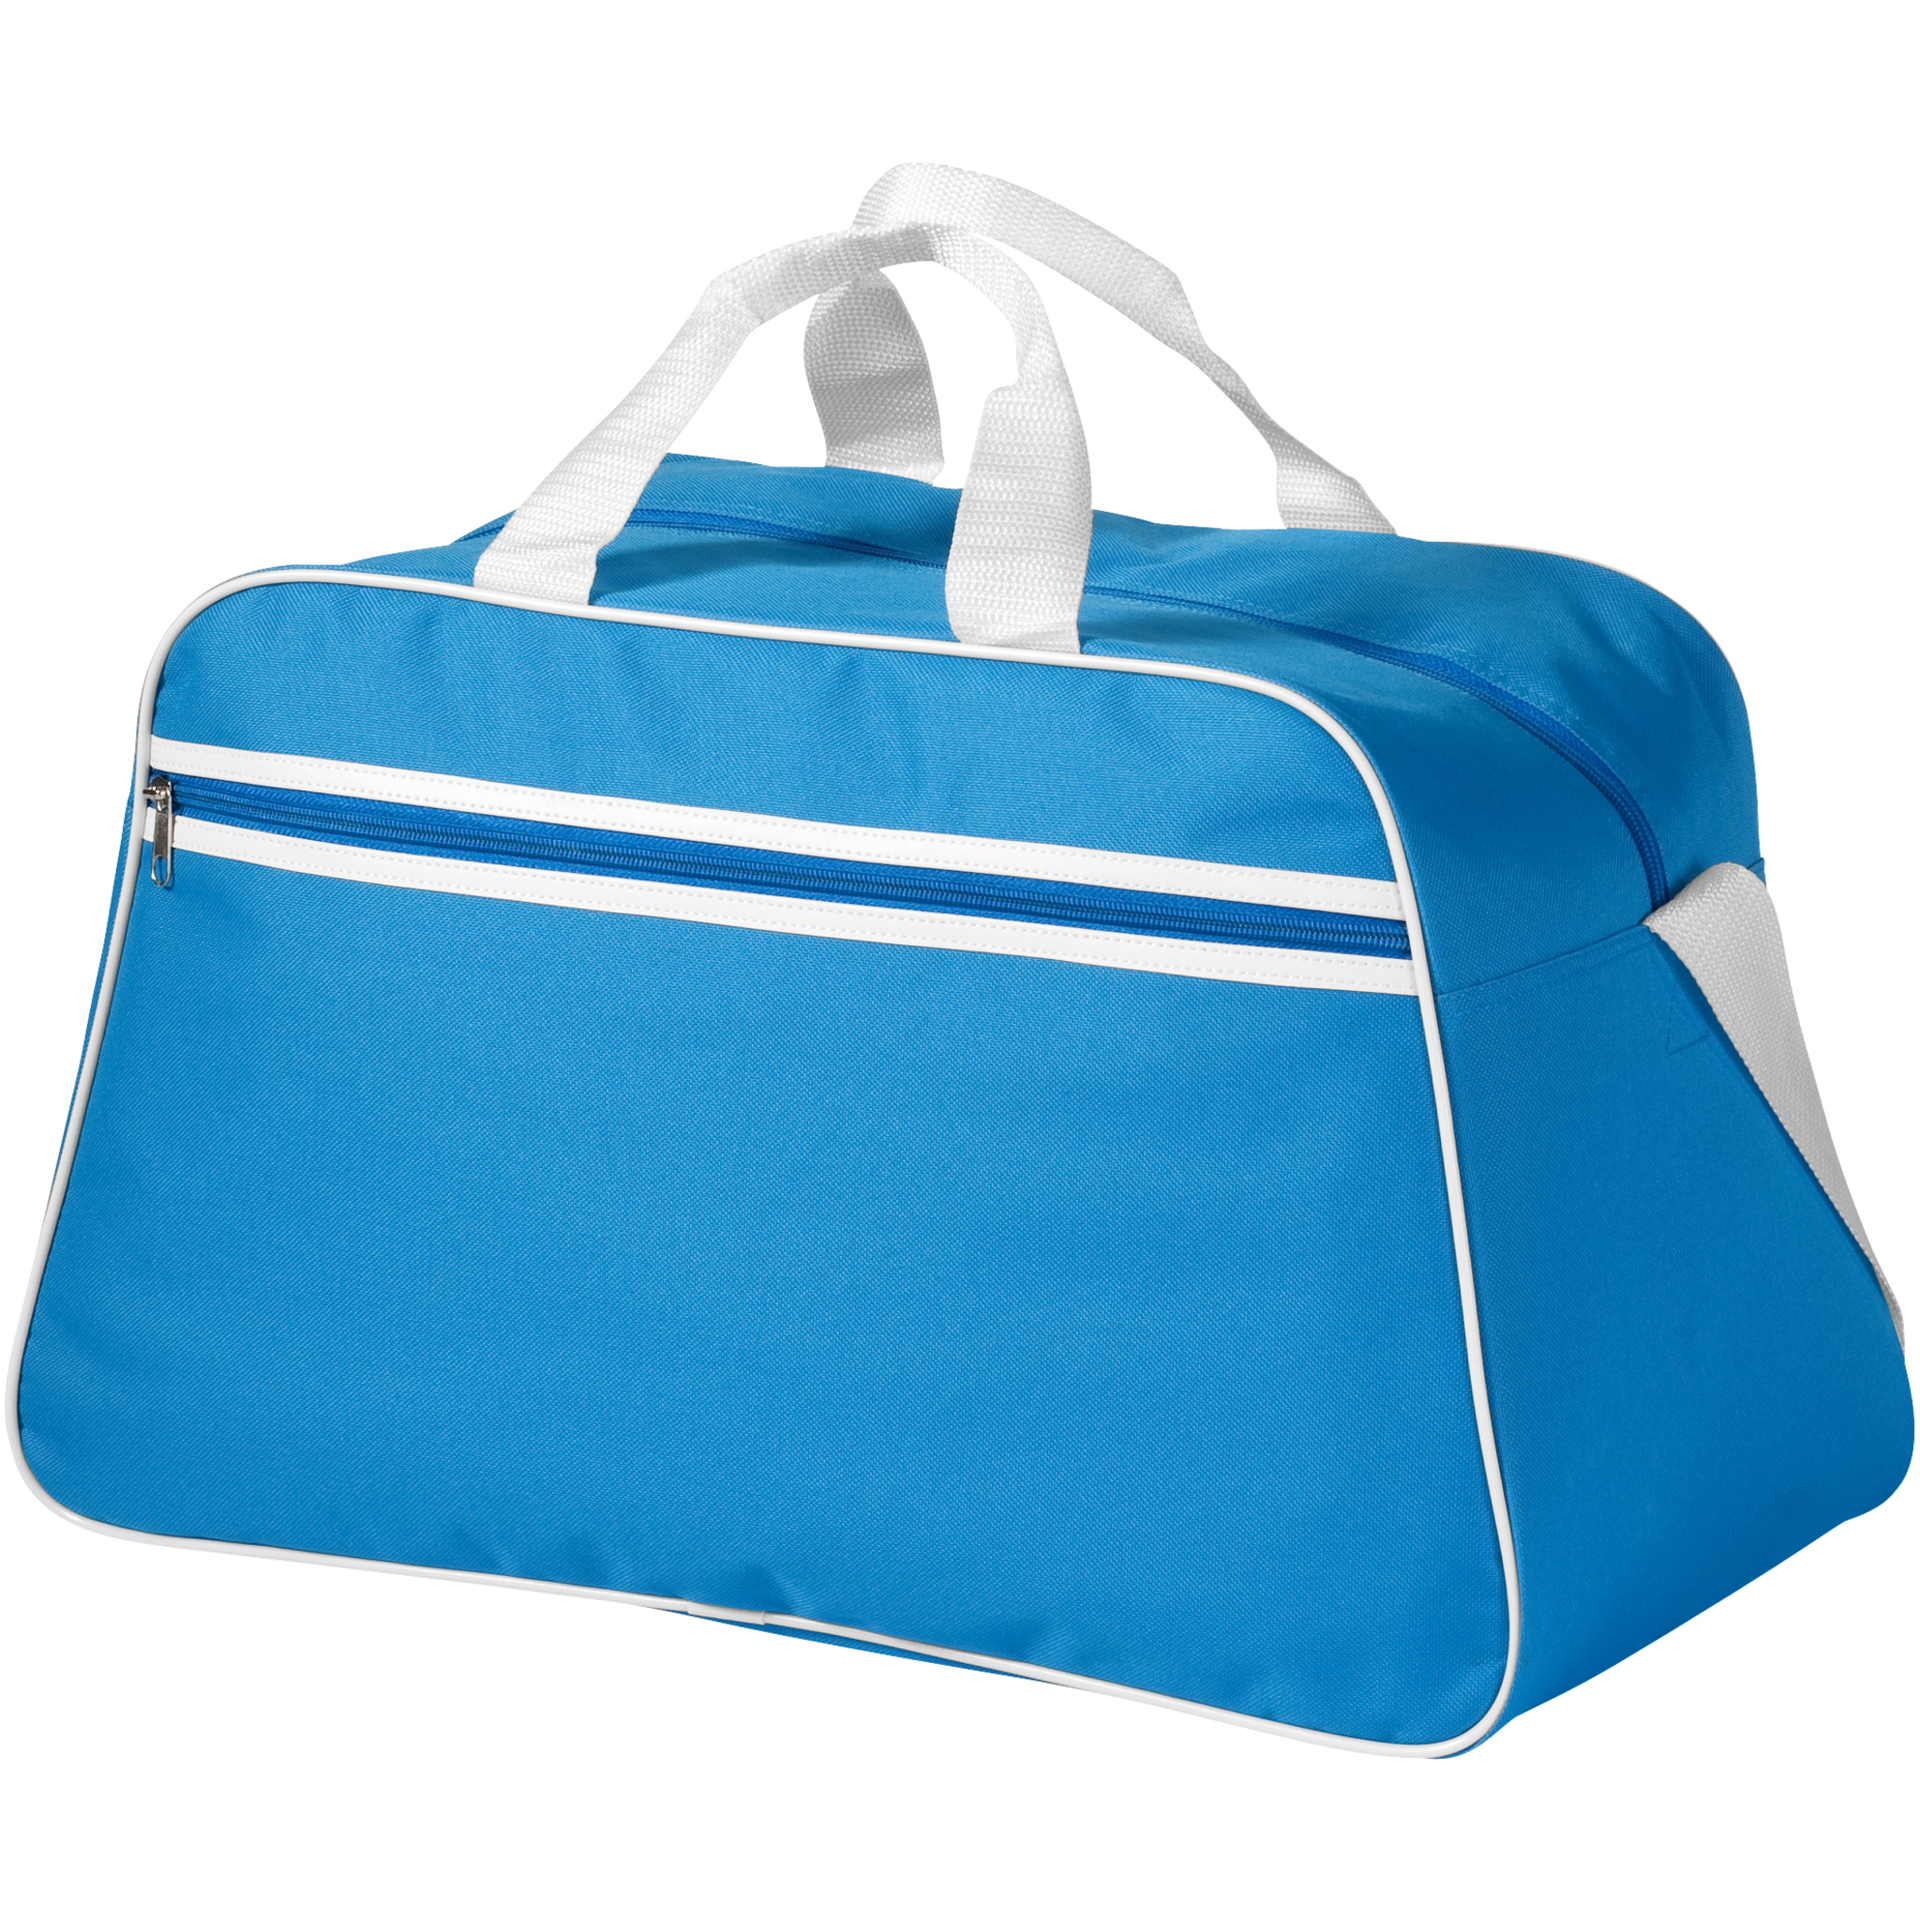 San Jose Sports Bag in blue and white